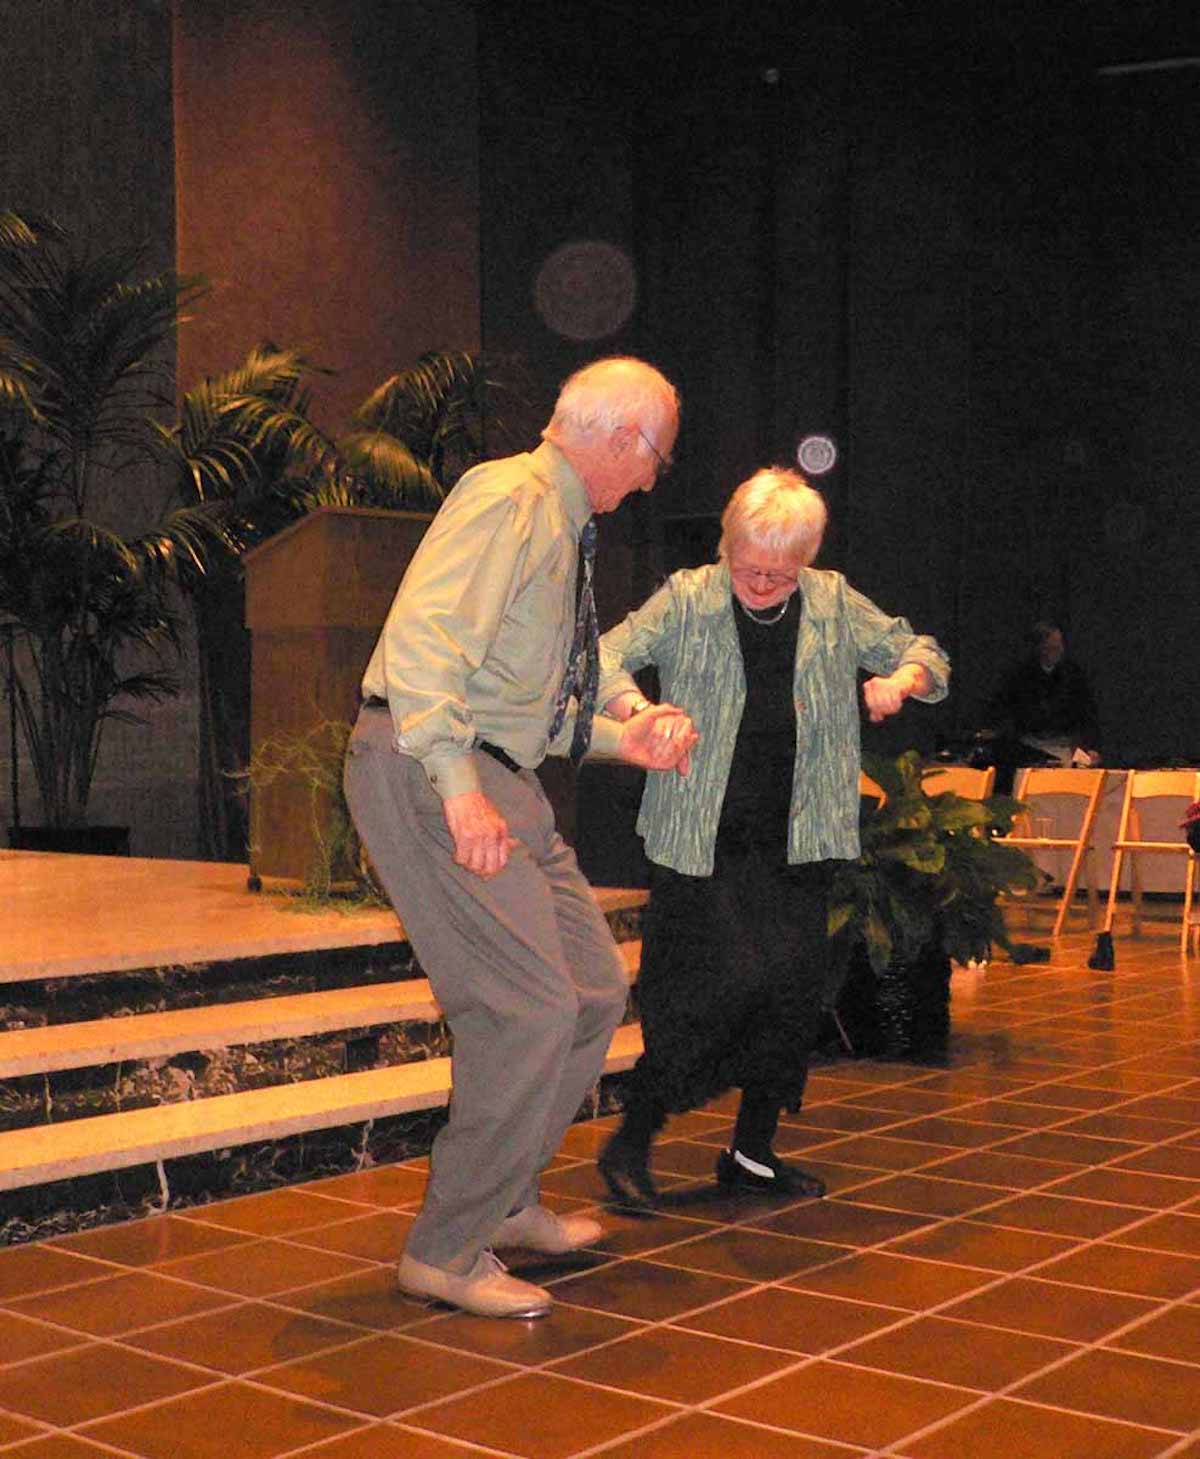 James Hillman and Susan Griffin tap dancing together, 2010. Photo courtesy of Susan Griffin.